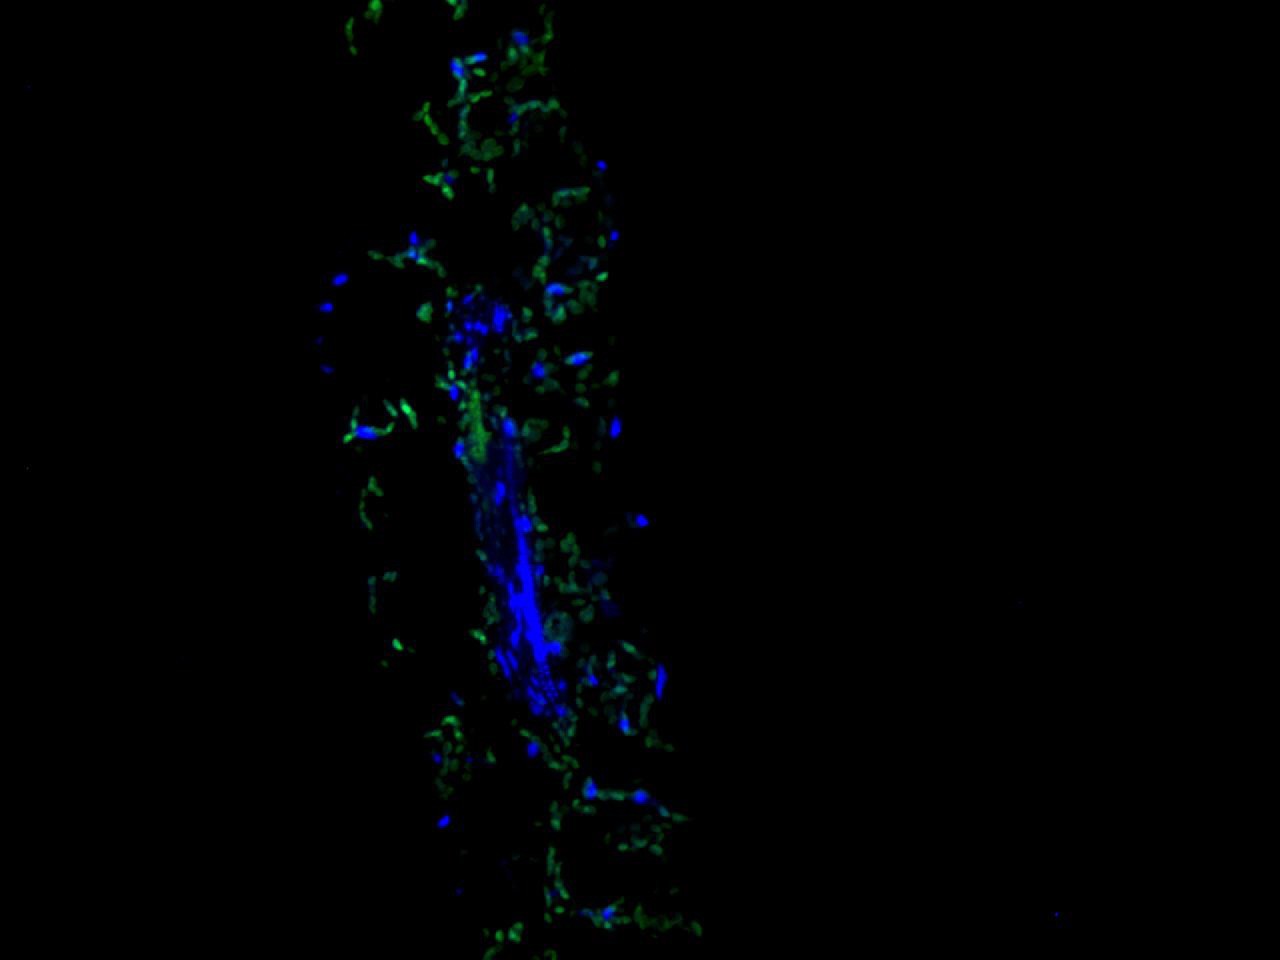 Fig2: IF staining TGG2 (green) in Arabidopsis thaliana (longitudinal section). The nuclear counter stain is DAPI (blue). Cells were fixed in paraformaldehyde, permeabilised with 0.25% Triton X100/PBS.